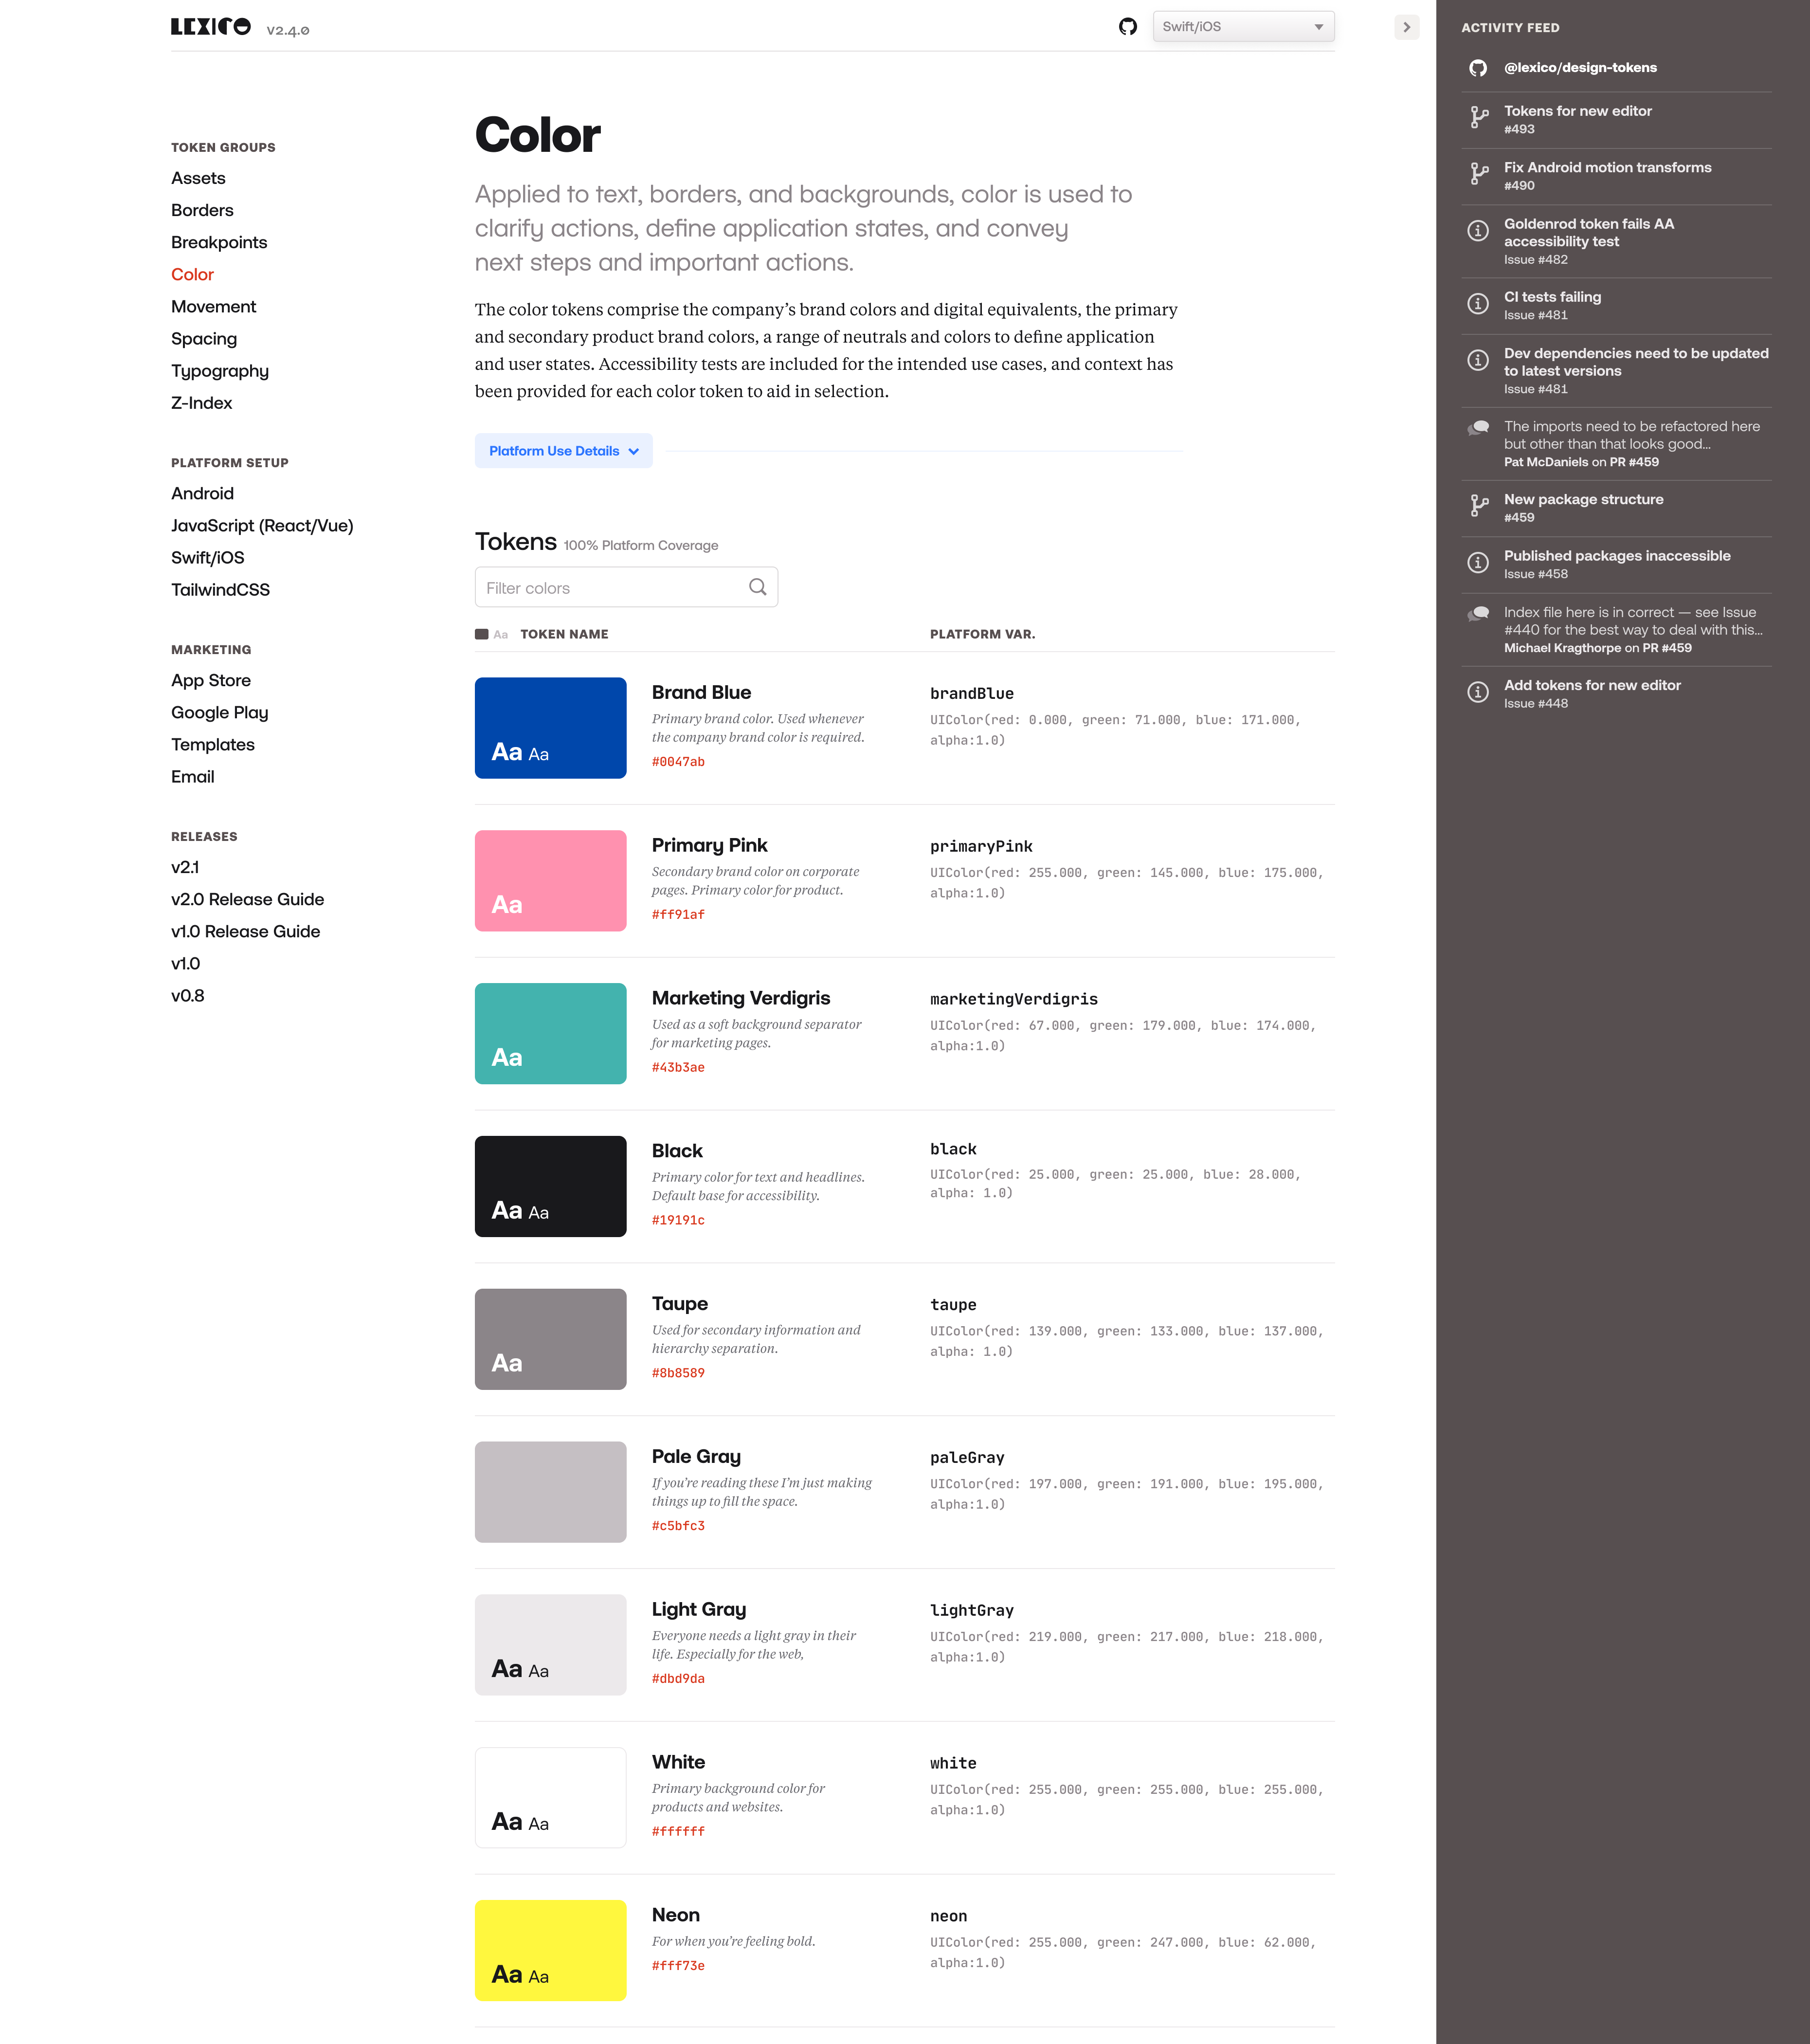 Example mockup of the color page for the design system showing a list view of the available colors with example swatches and variable and value information.